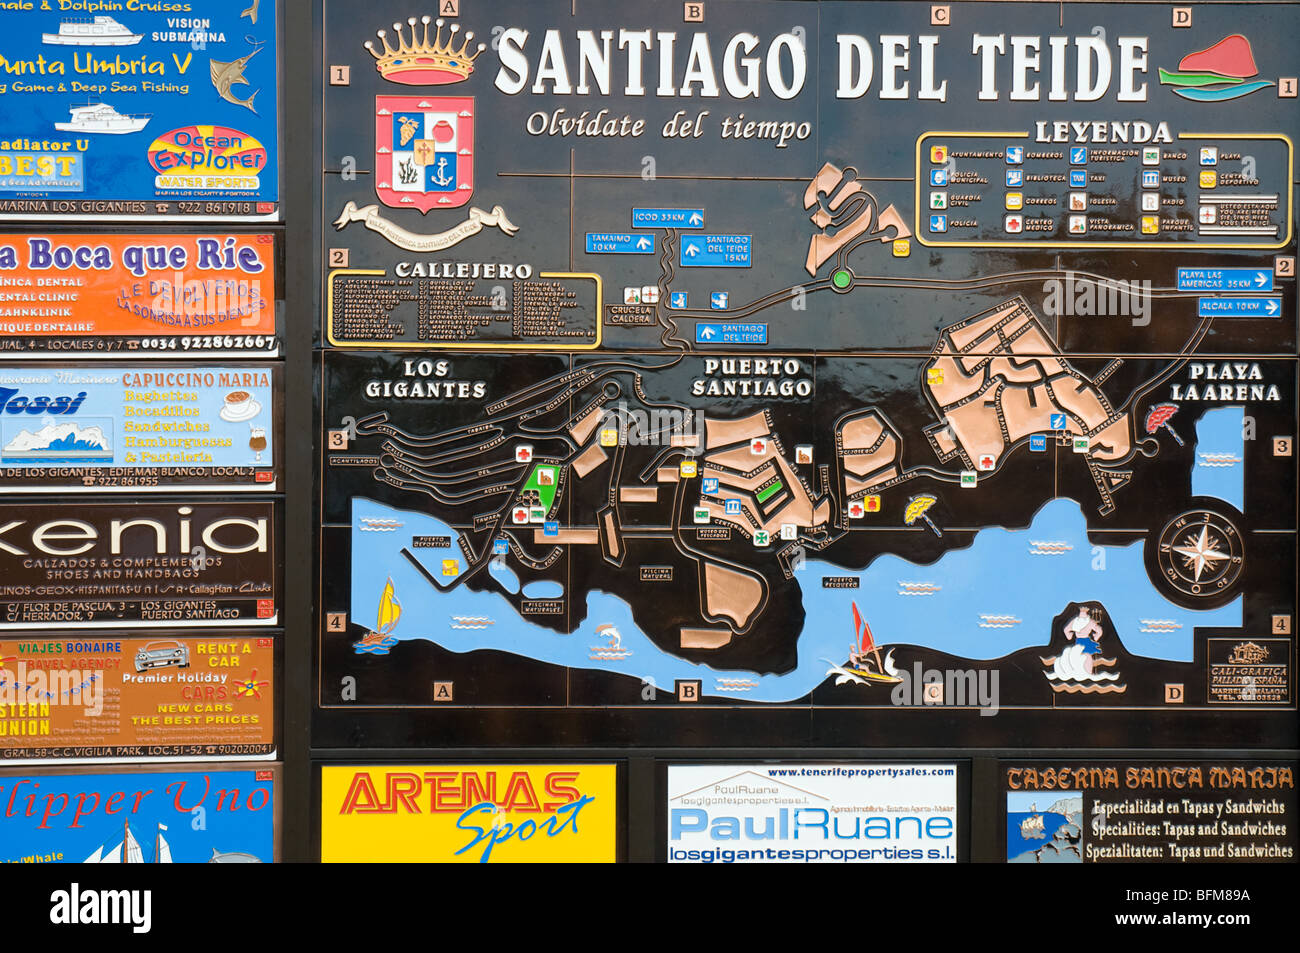 Map of Santiago del Teide for tourists Stock Photo